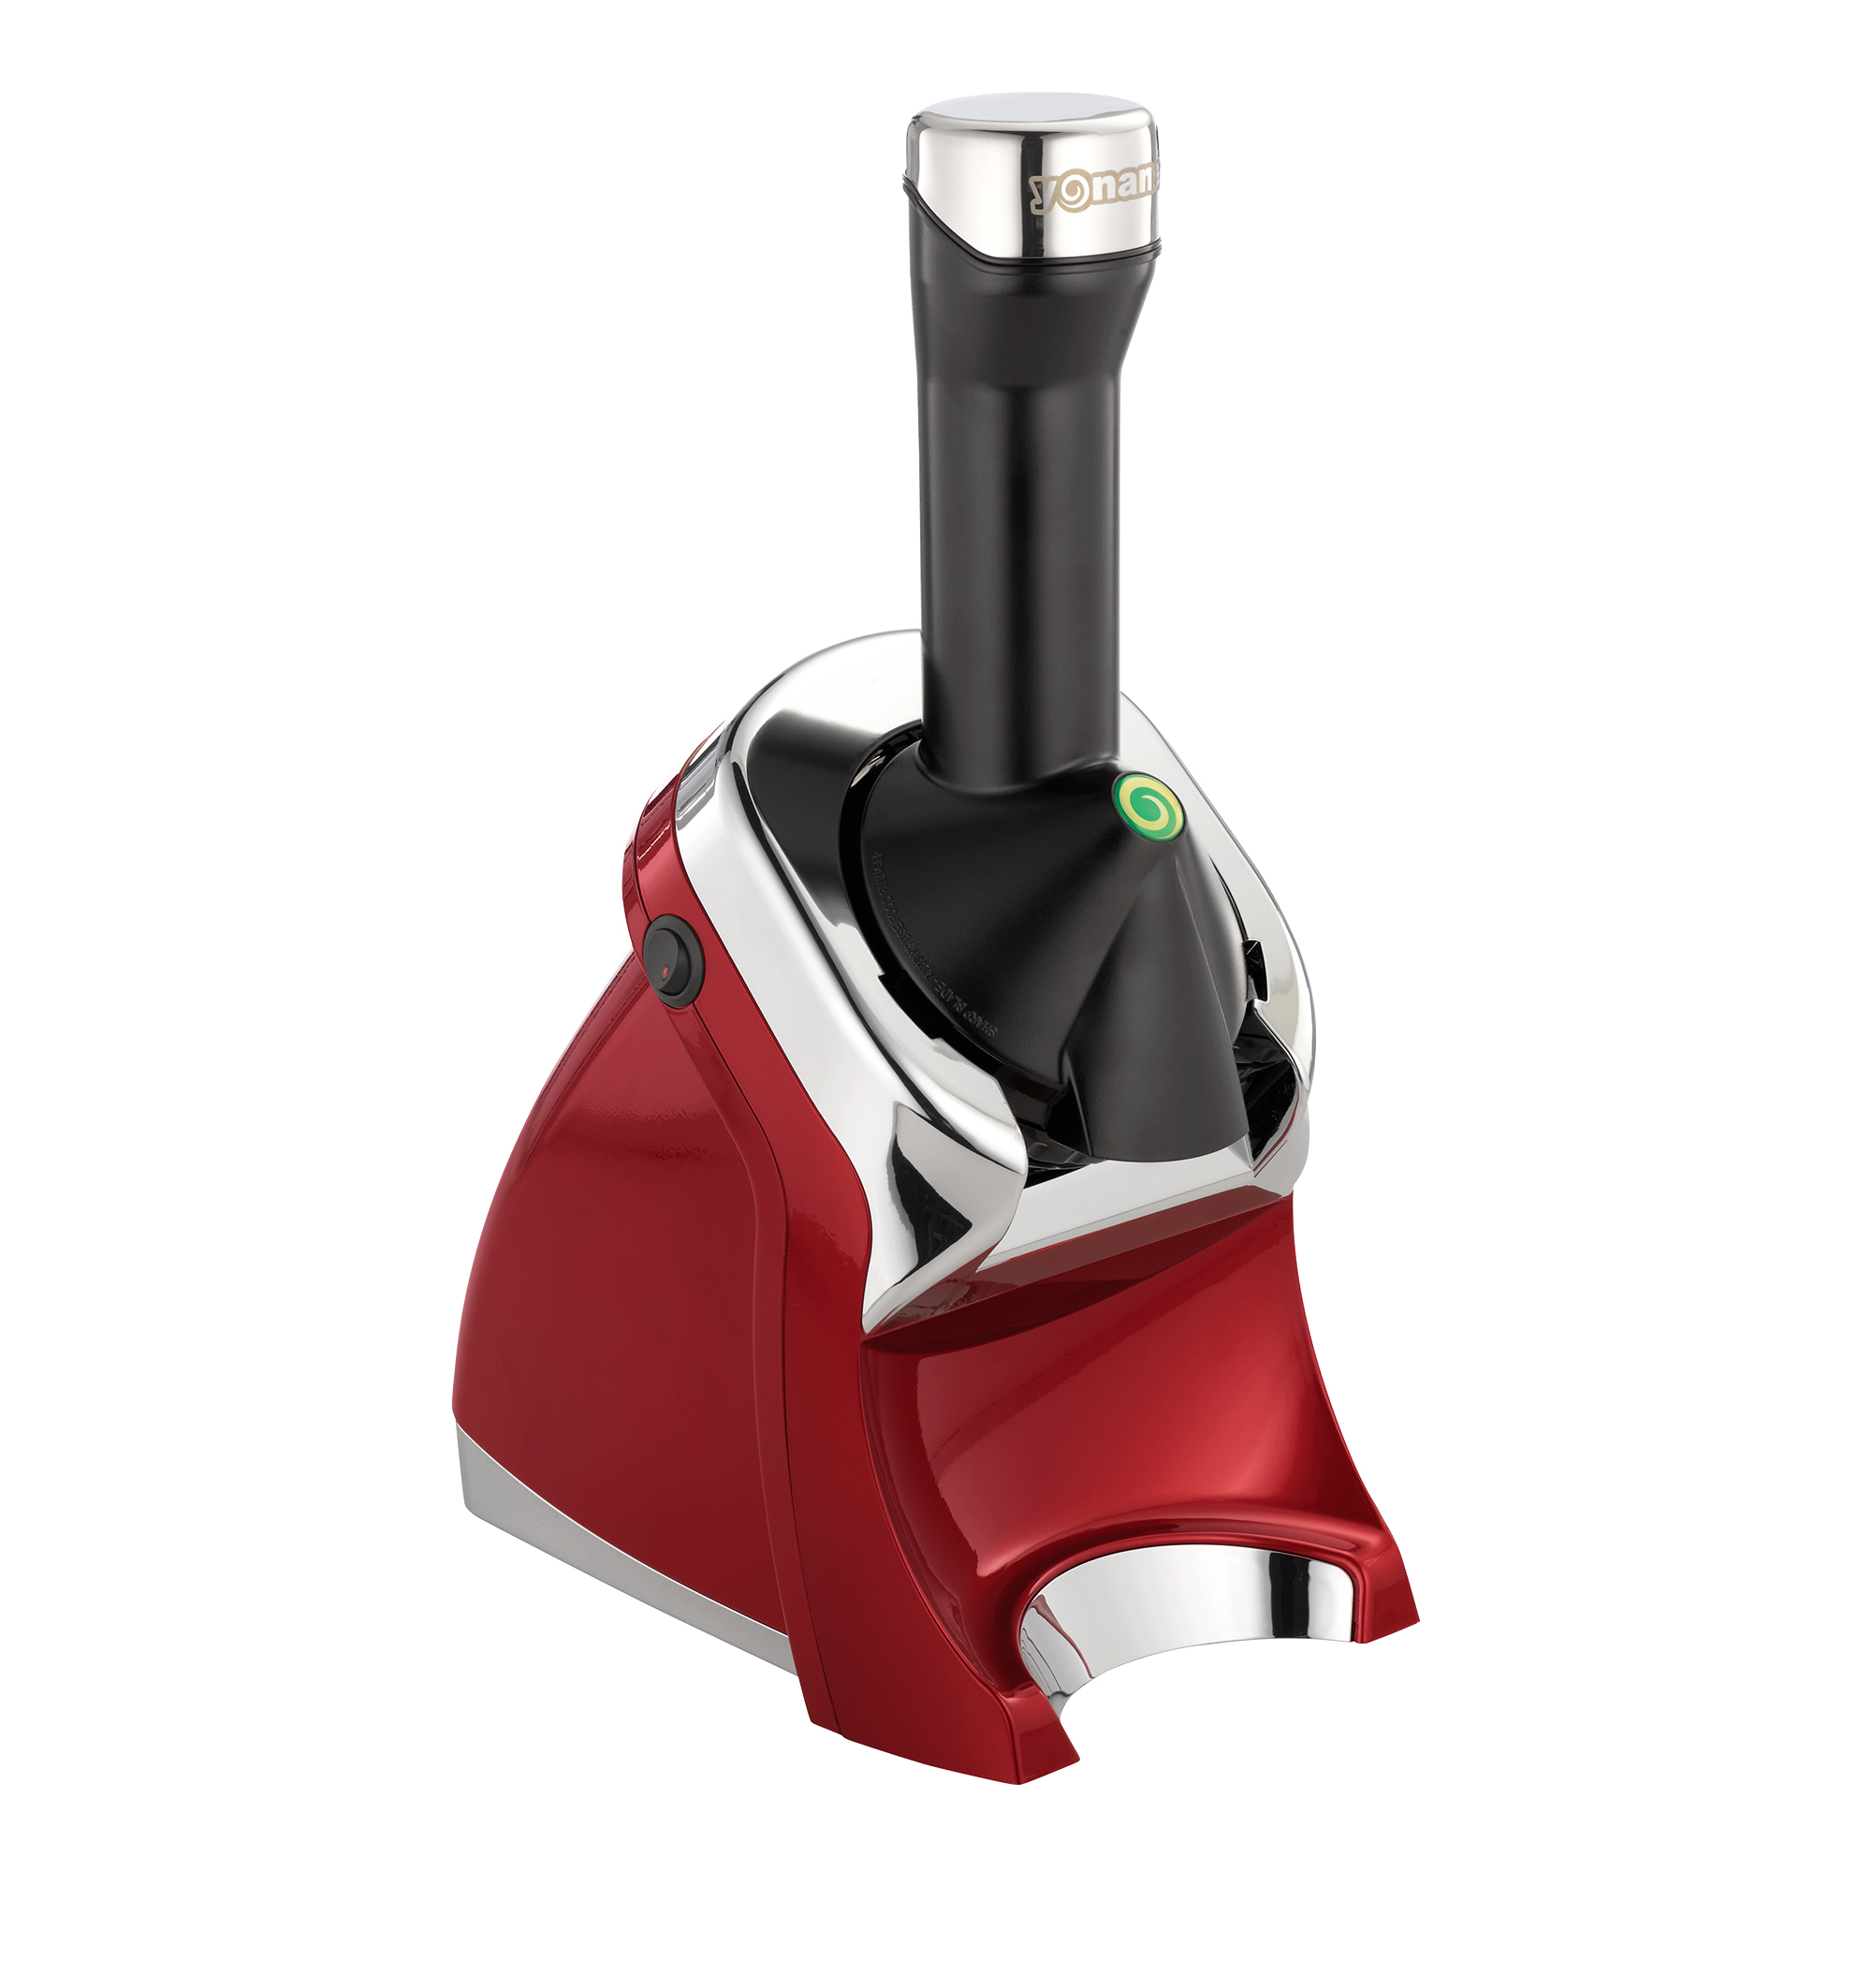 Yonanas Deluxe Red Non-Dairy Frozen Fruit Soft Serve Dessert Maker, Includes 75 Recipes, 200 Watts - image 3 of 10